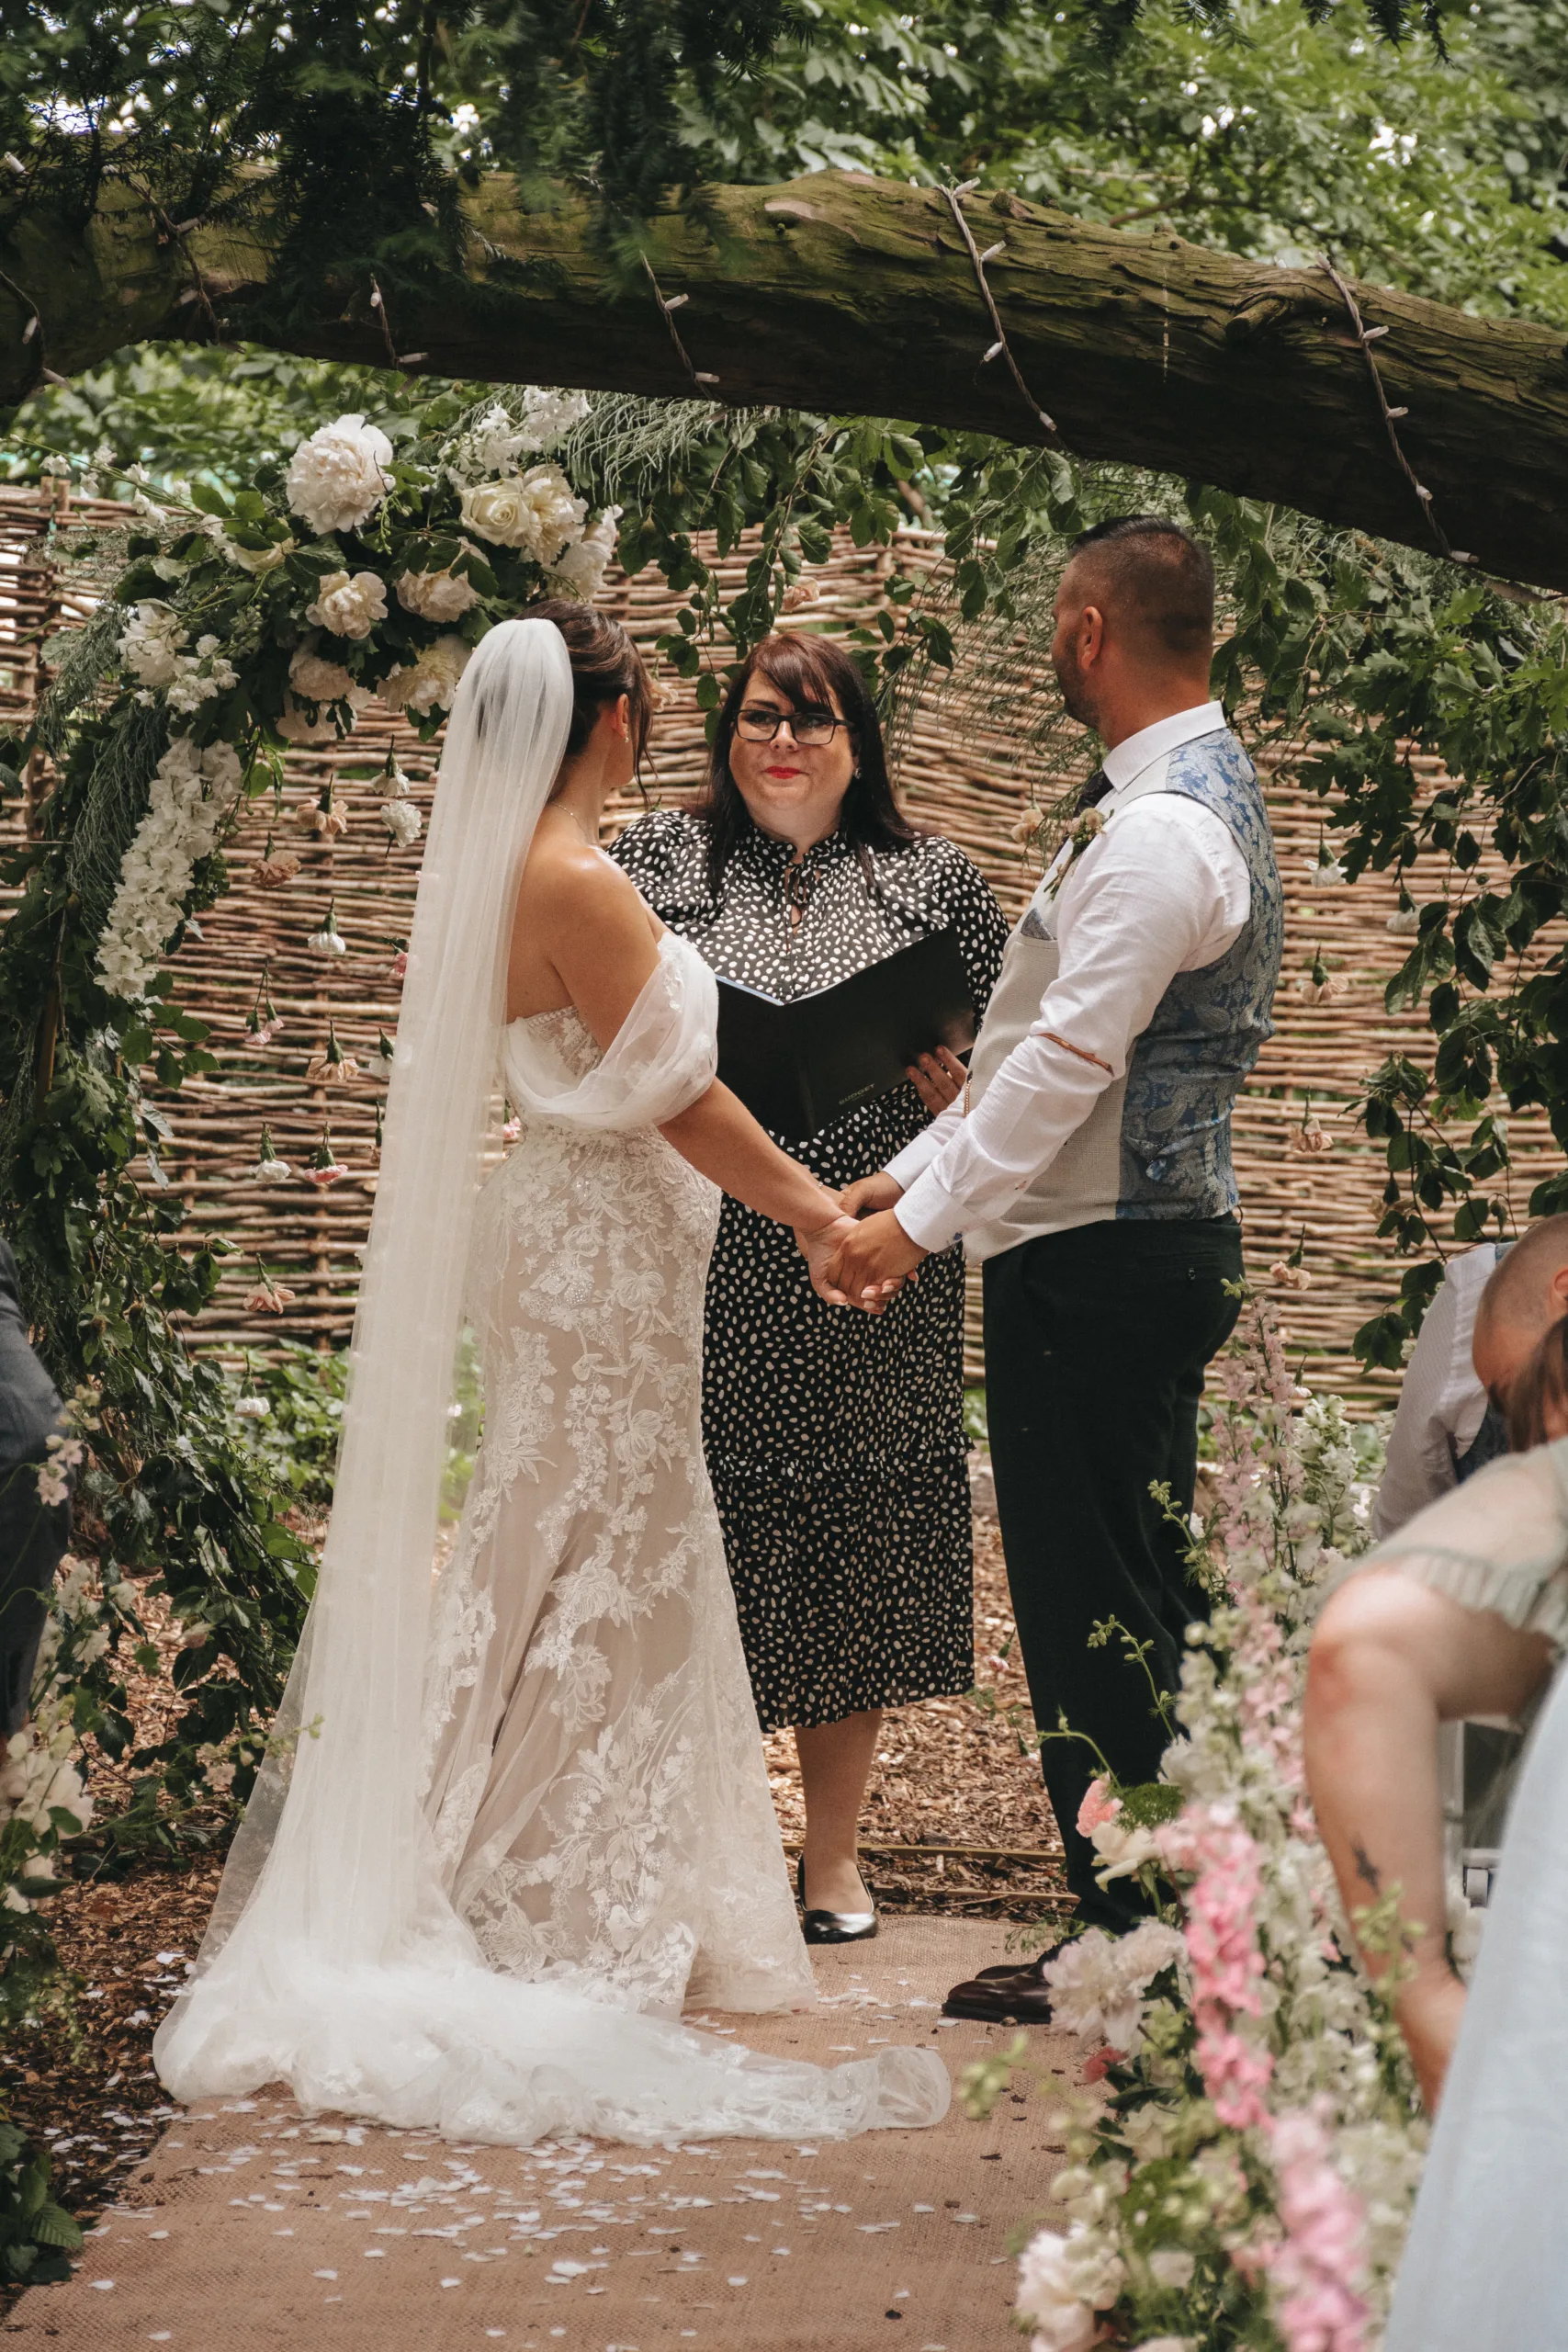 A bride and groom exchange vows under an archway in a Yorkshire garden.